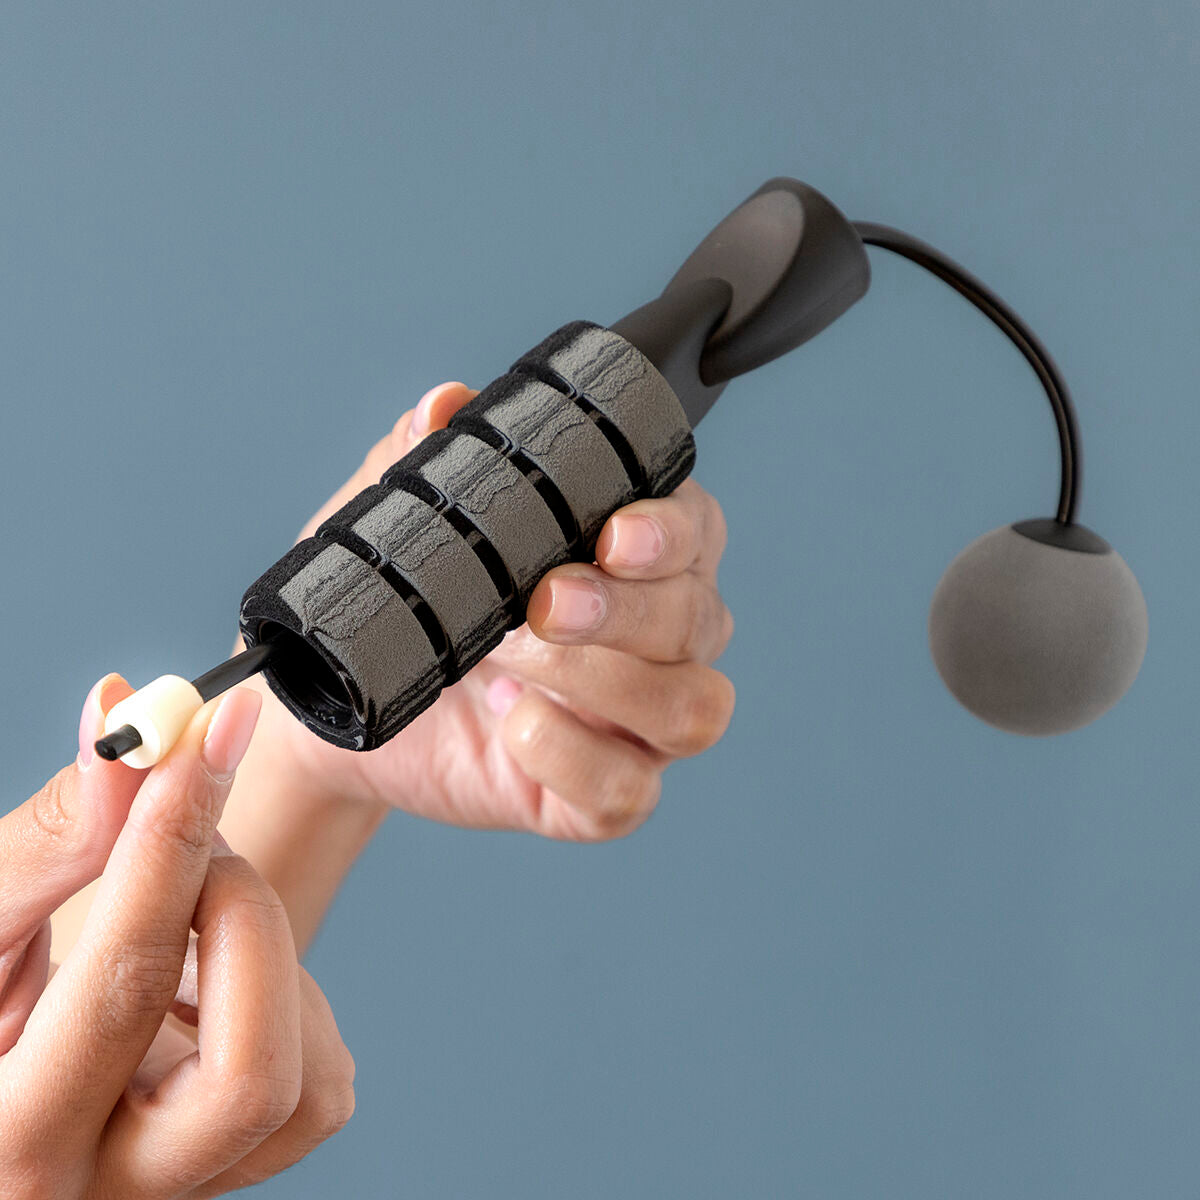 Wireless and Rope-free Skipping Rope Jupply InnovaGoods